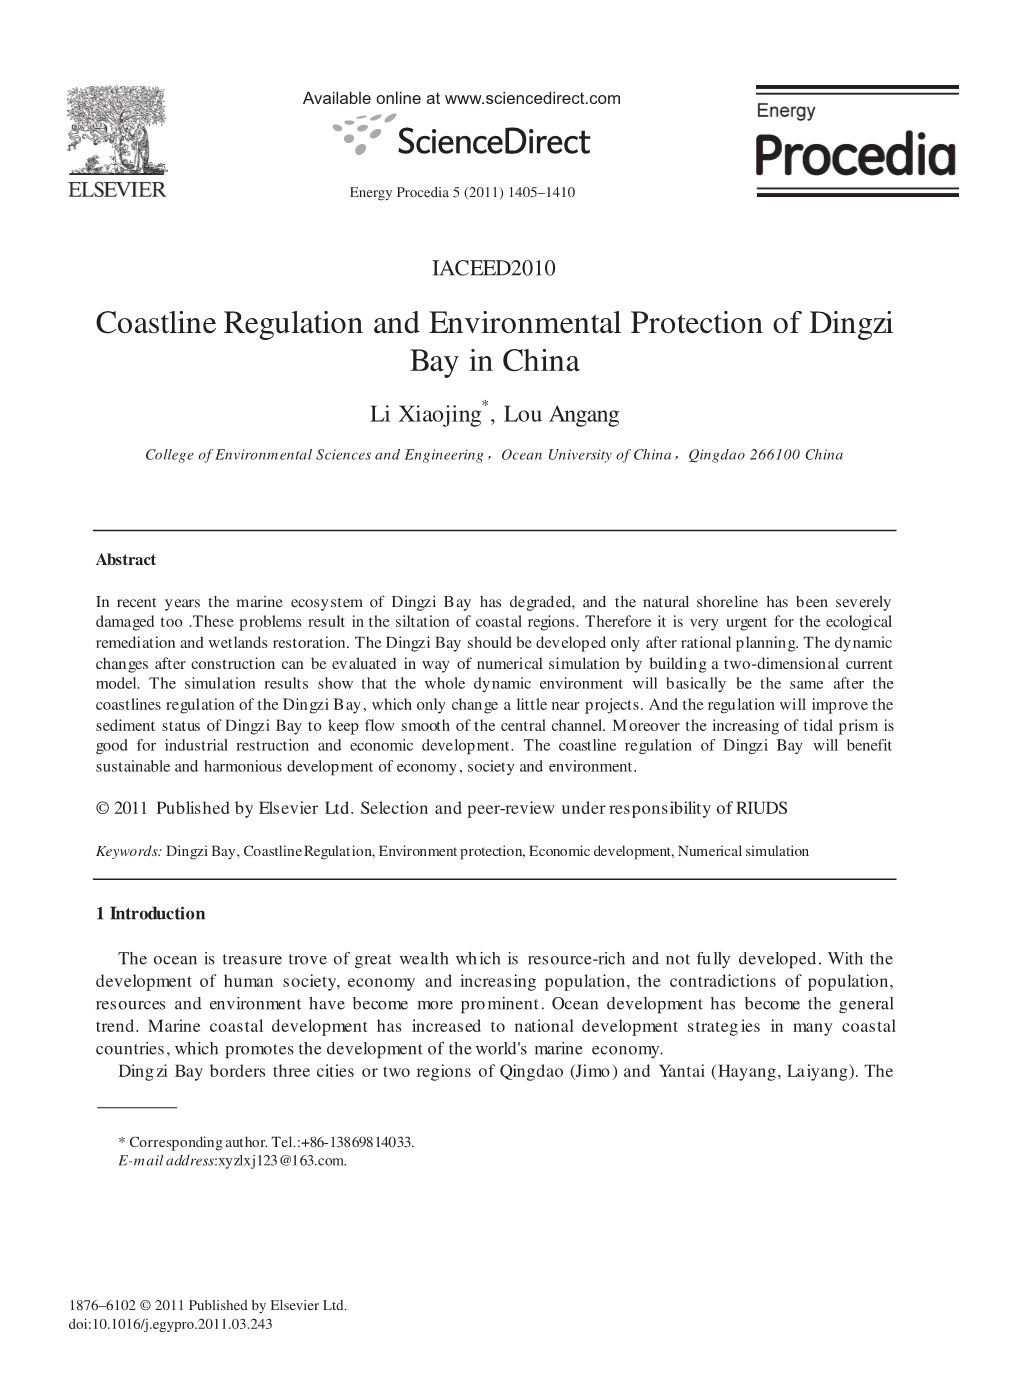 Coastline Regulation and Environmental Protection of Dingzi Bay in China